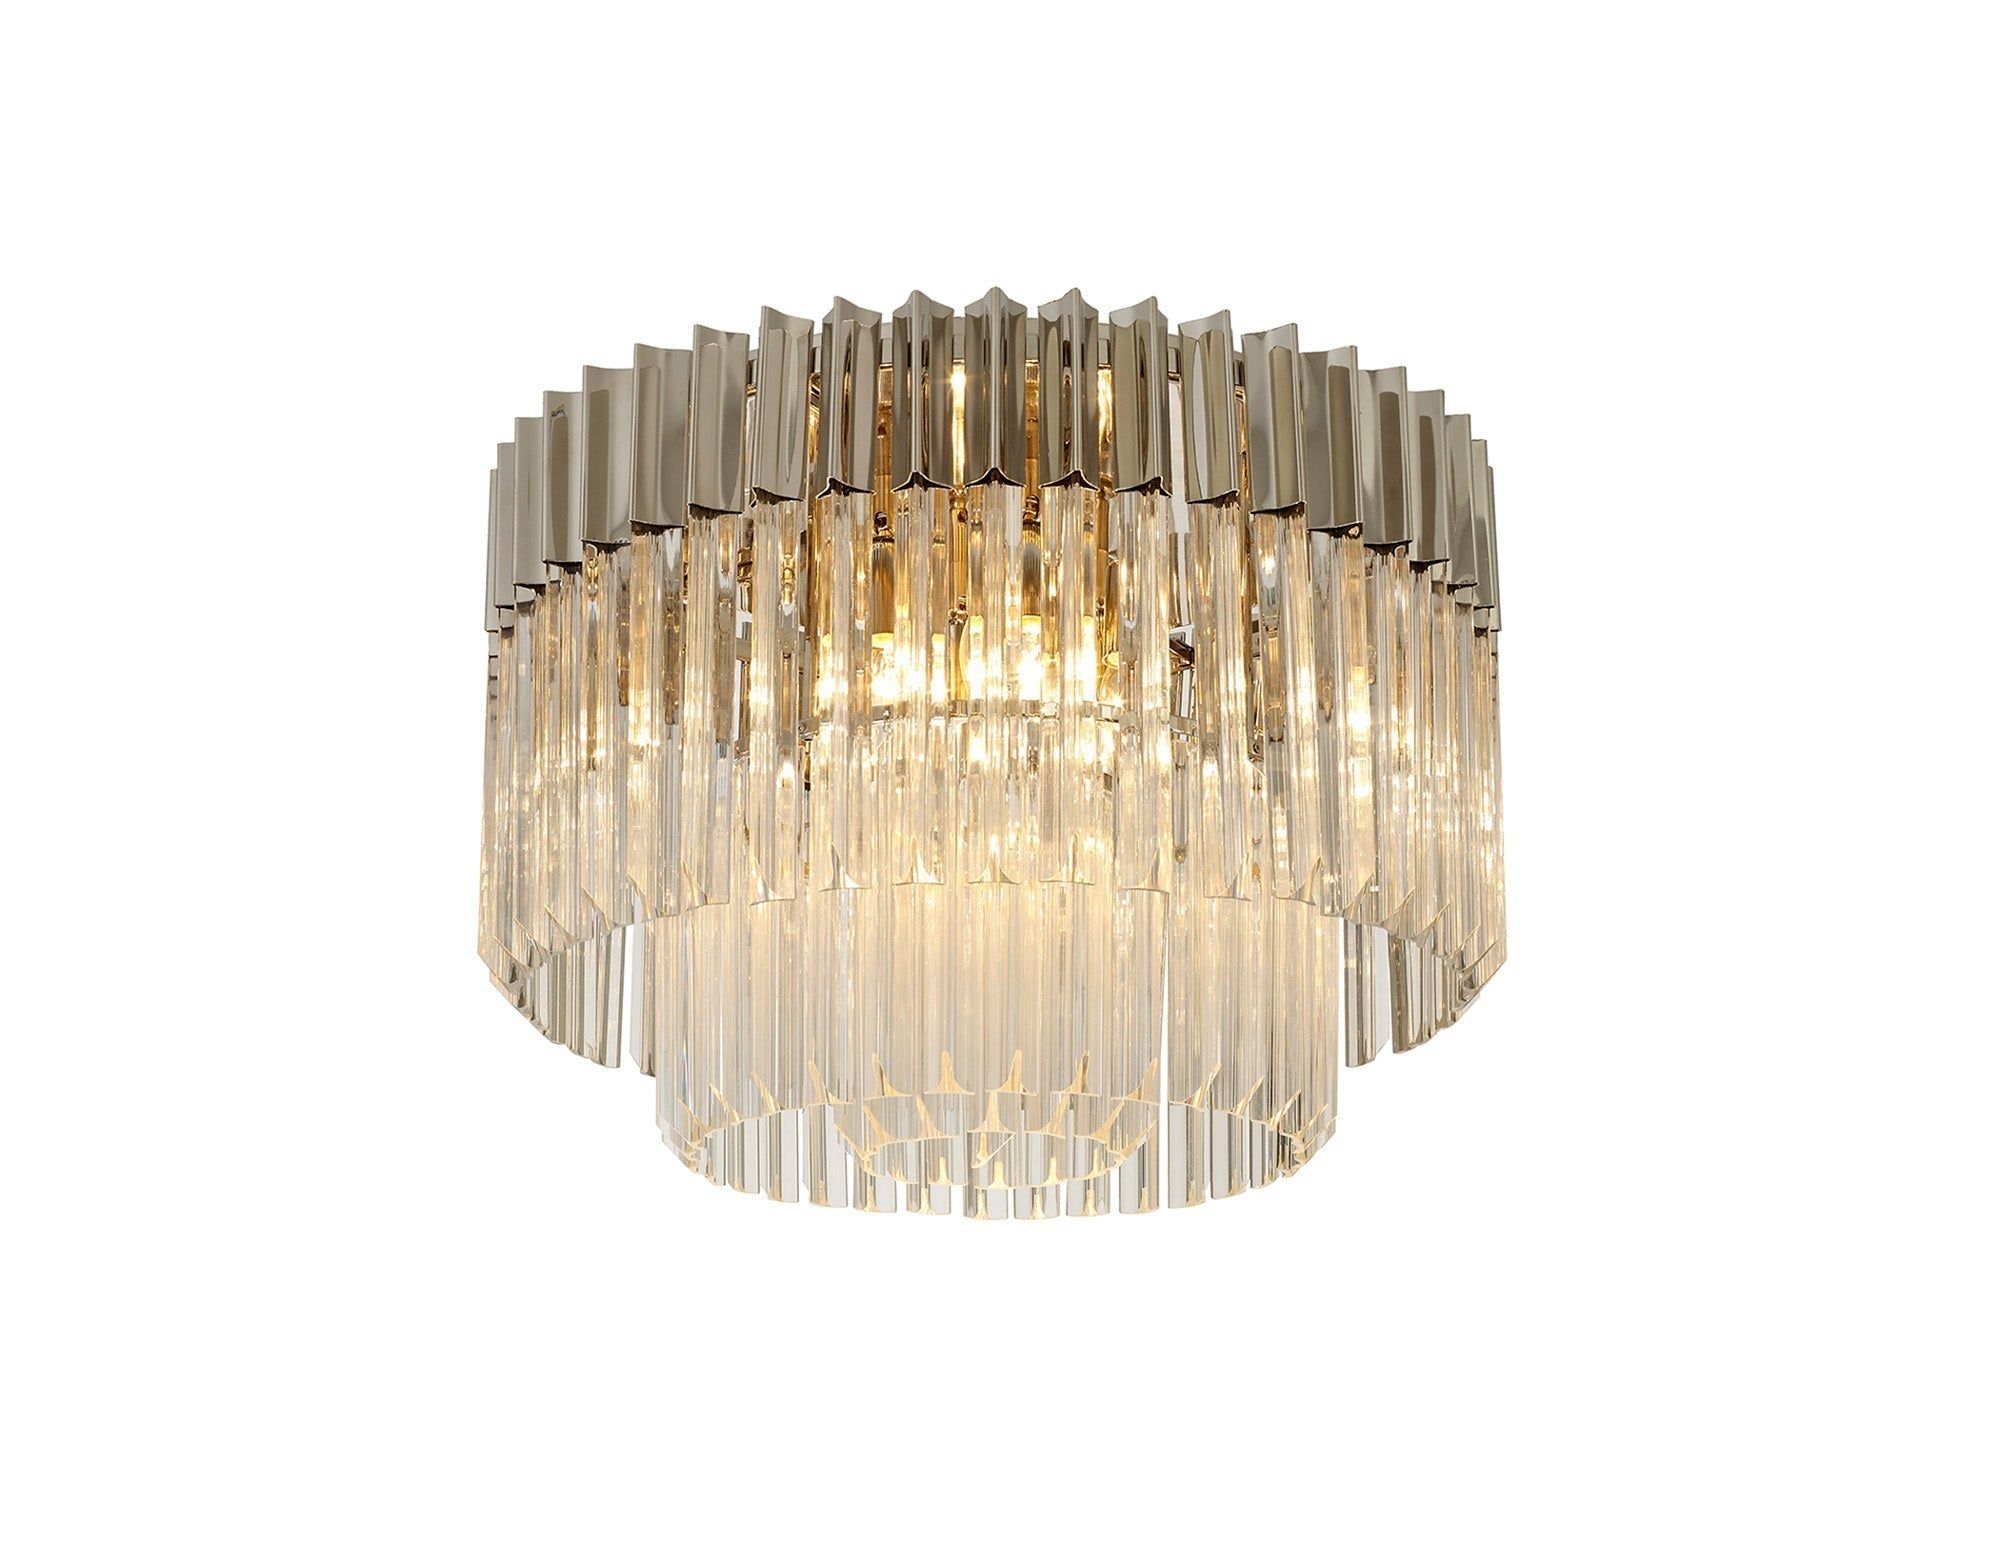 Georgia 7/12lt Round Flush Ceiling Light, Brass/Clear or Polished Nickel/Clear